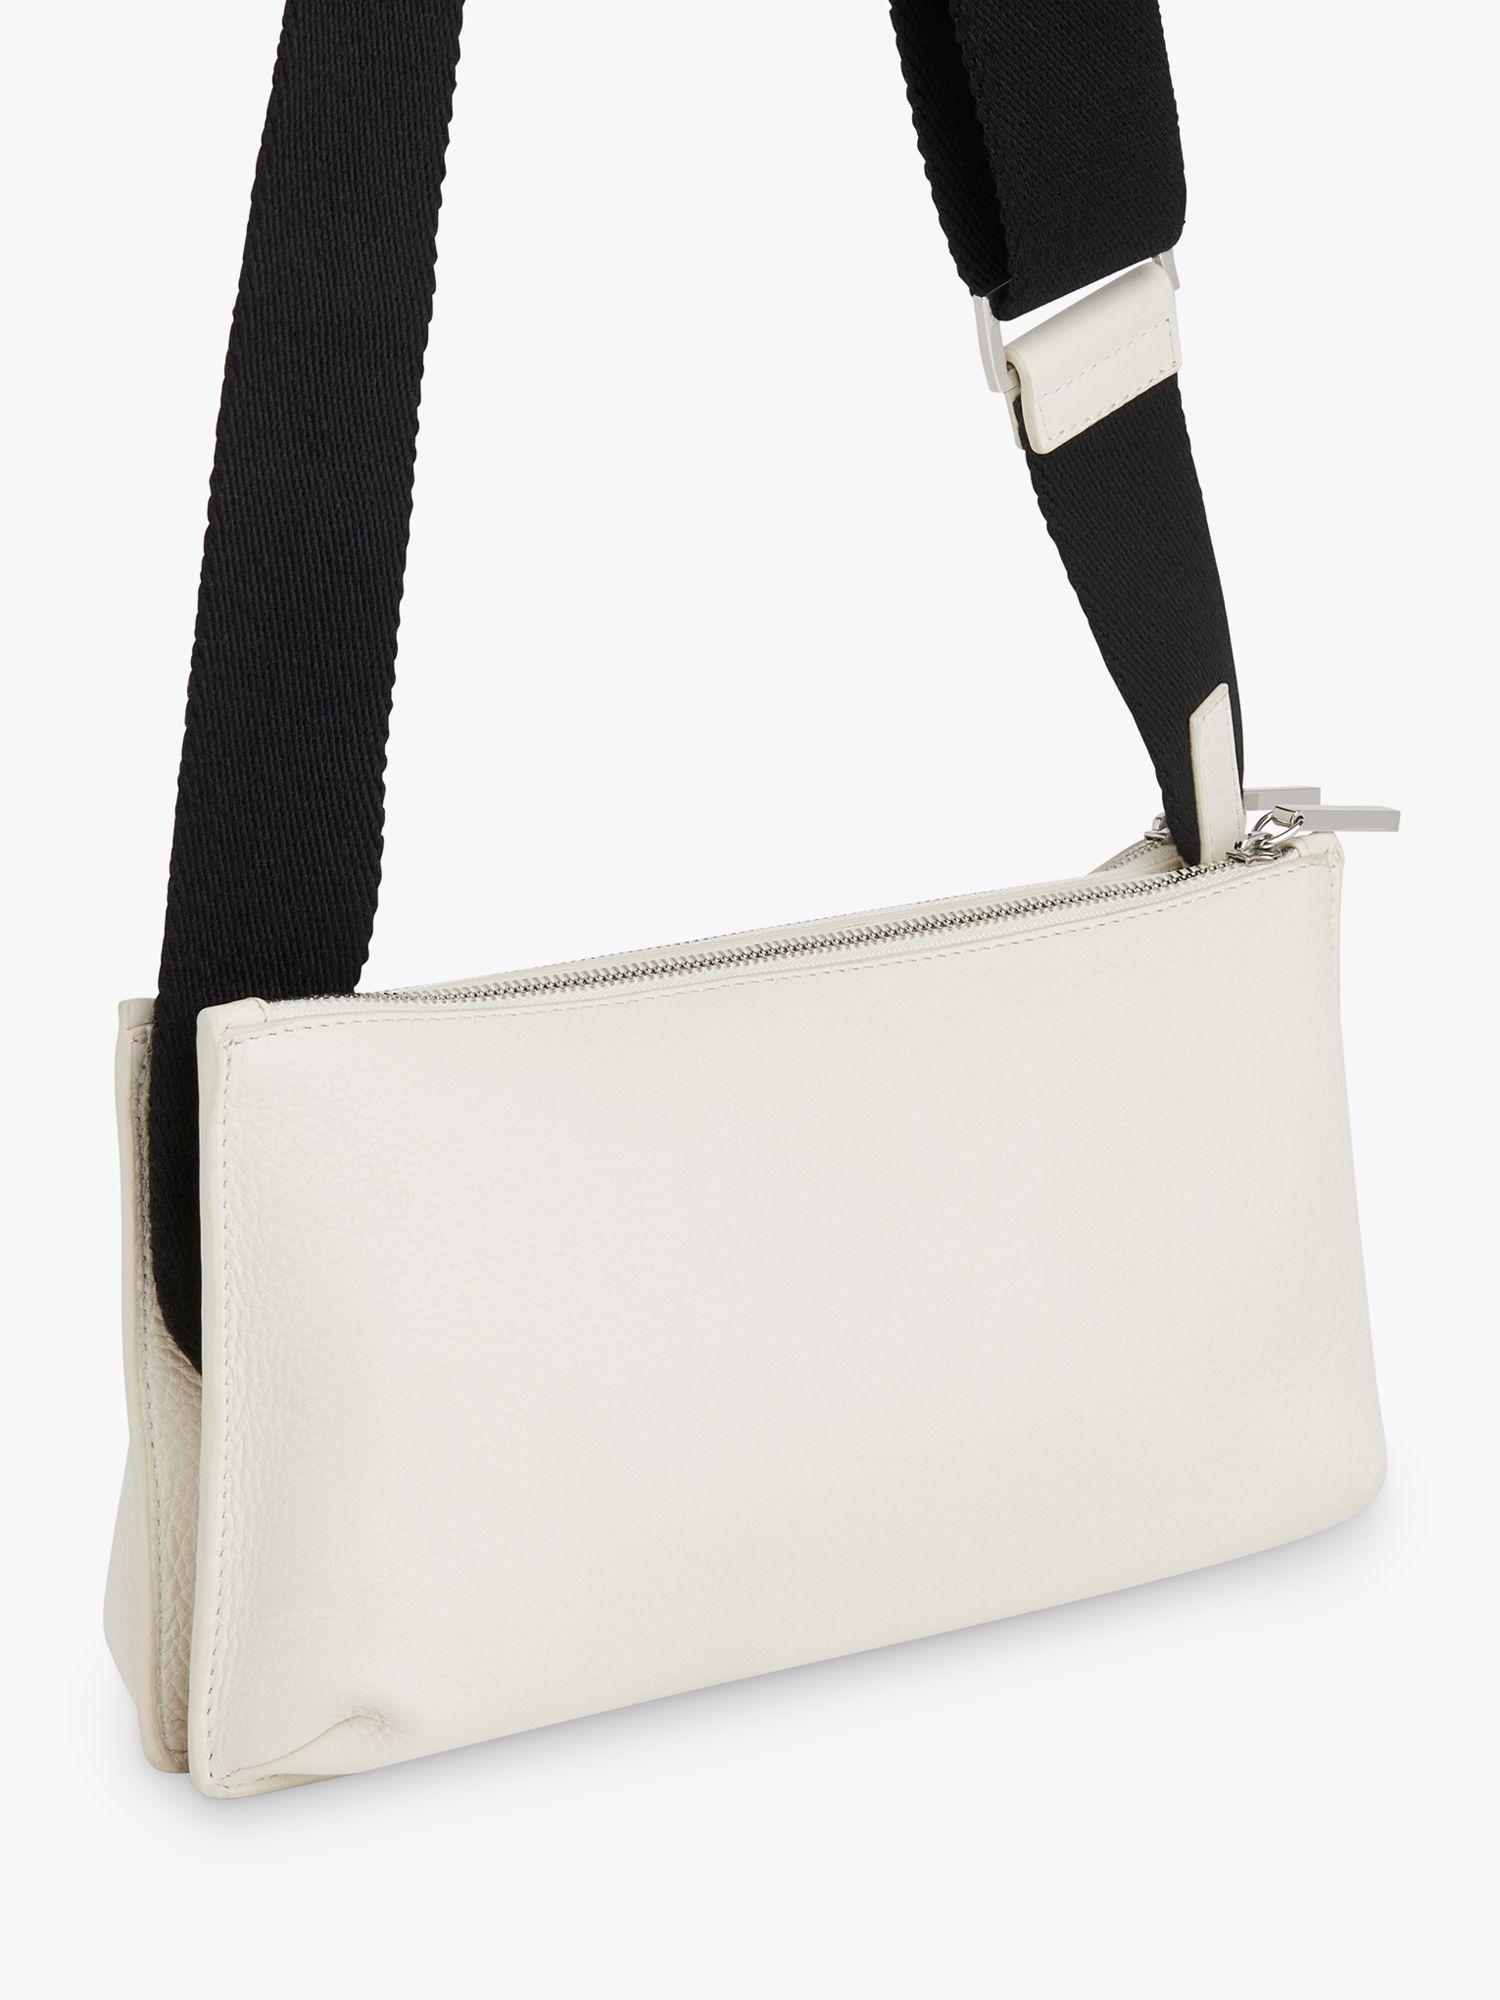 Buy Whistles Kai Leather Double Pouch Bag Online at johnlewis.com